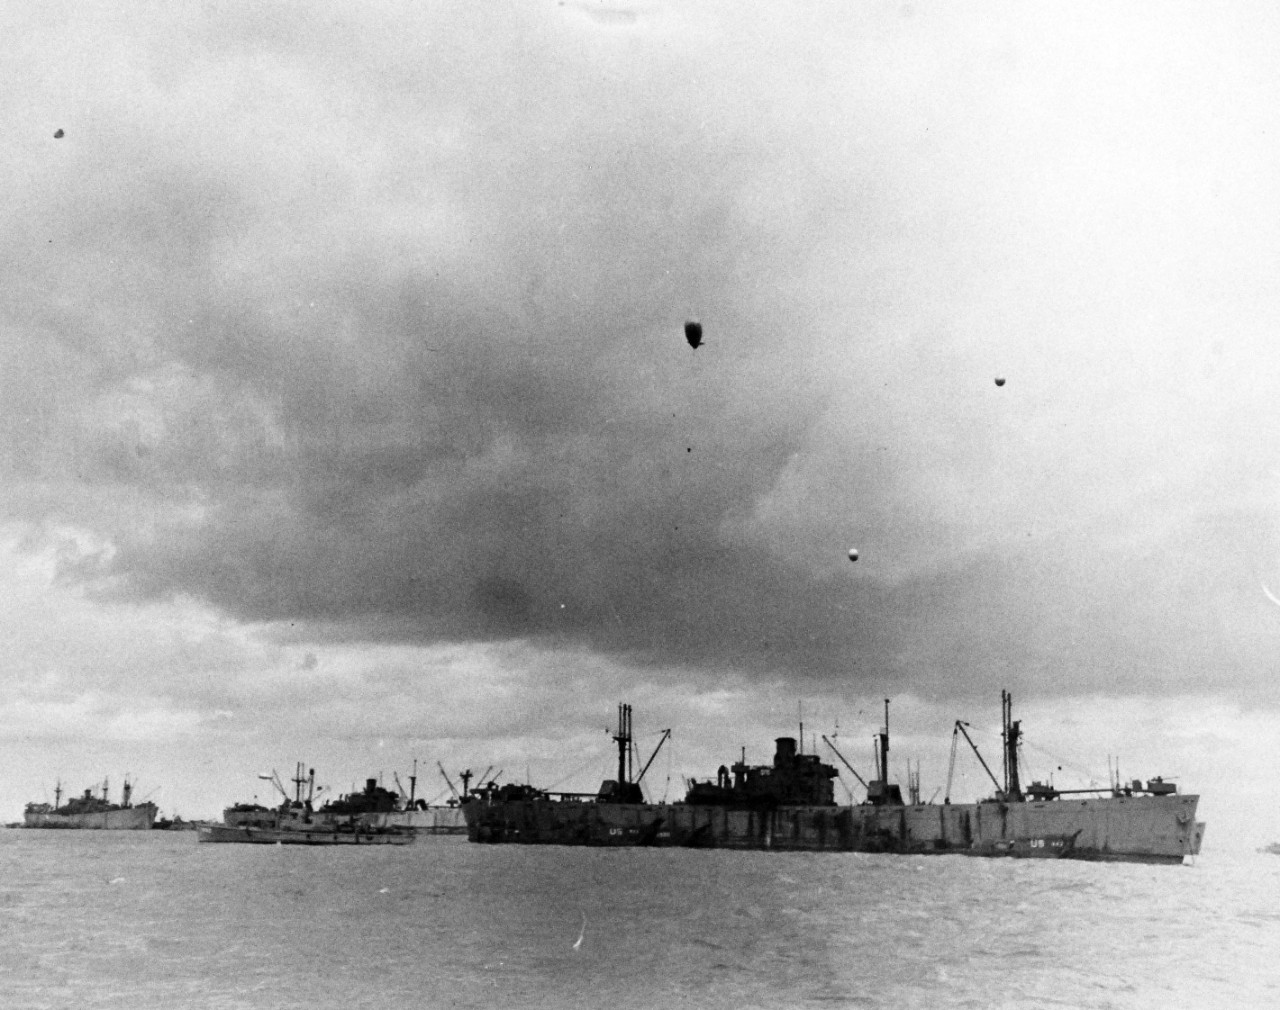 80-G-285127:  Normandy Invasion, Mulberries, June 1944.   A “Gooseberry,” a line of sunken ships forming part of a U.S. Mulberry, a man-made harbor off Omaha Beach, France, protecting landing craft from storms in English Channel.   Photograph released November 7, 1944.  Official U.S. Navy photograph, now in the collections of the National Archives.  (2016/03/15).